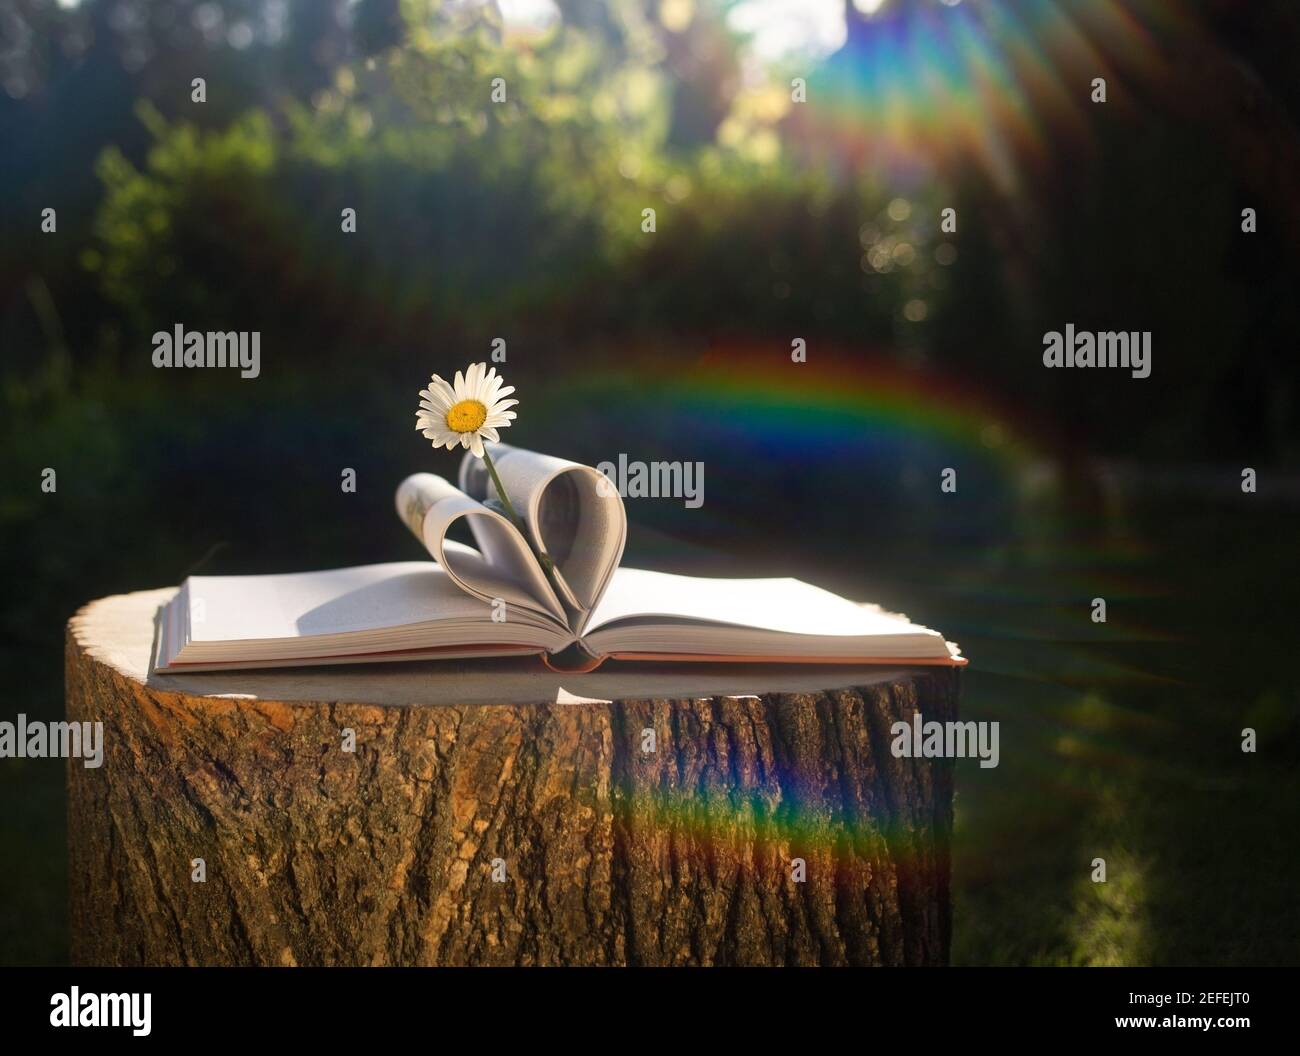 Open book with heart-shaped pages and chamomile flower on it. the concept of wisdom, freedom, harmony. Love for nature and literature. art photography Stock Photo